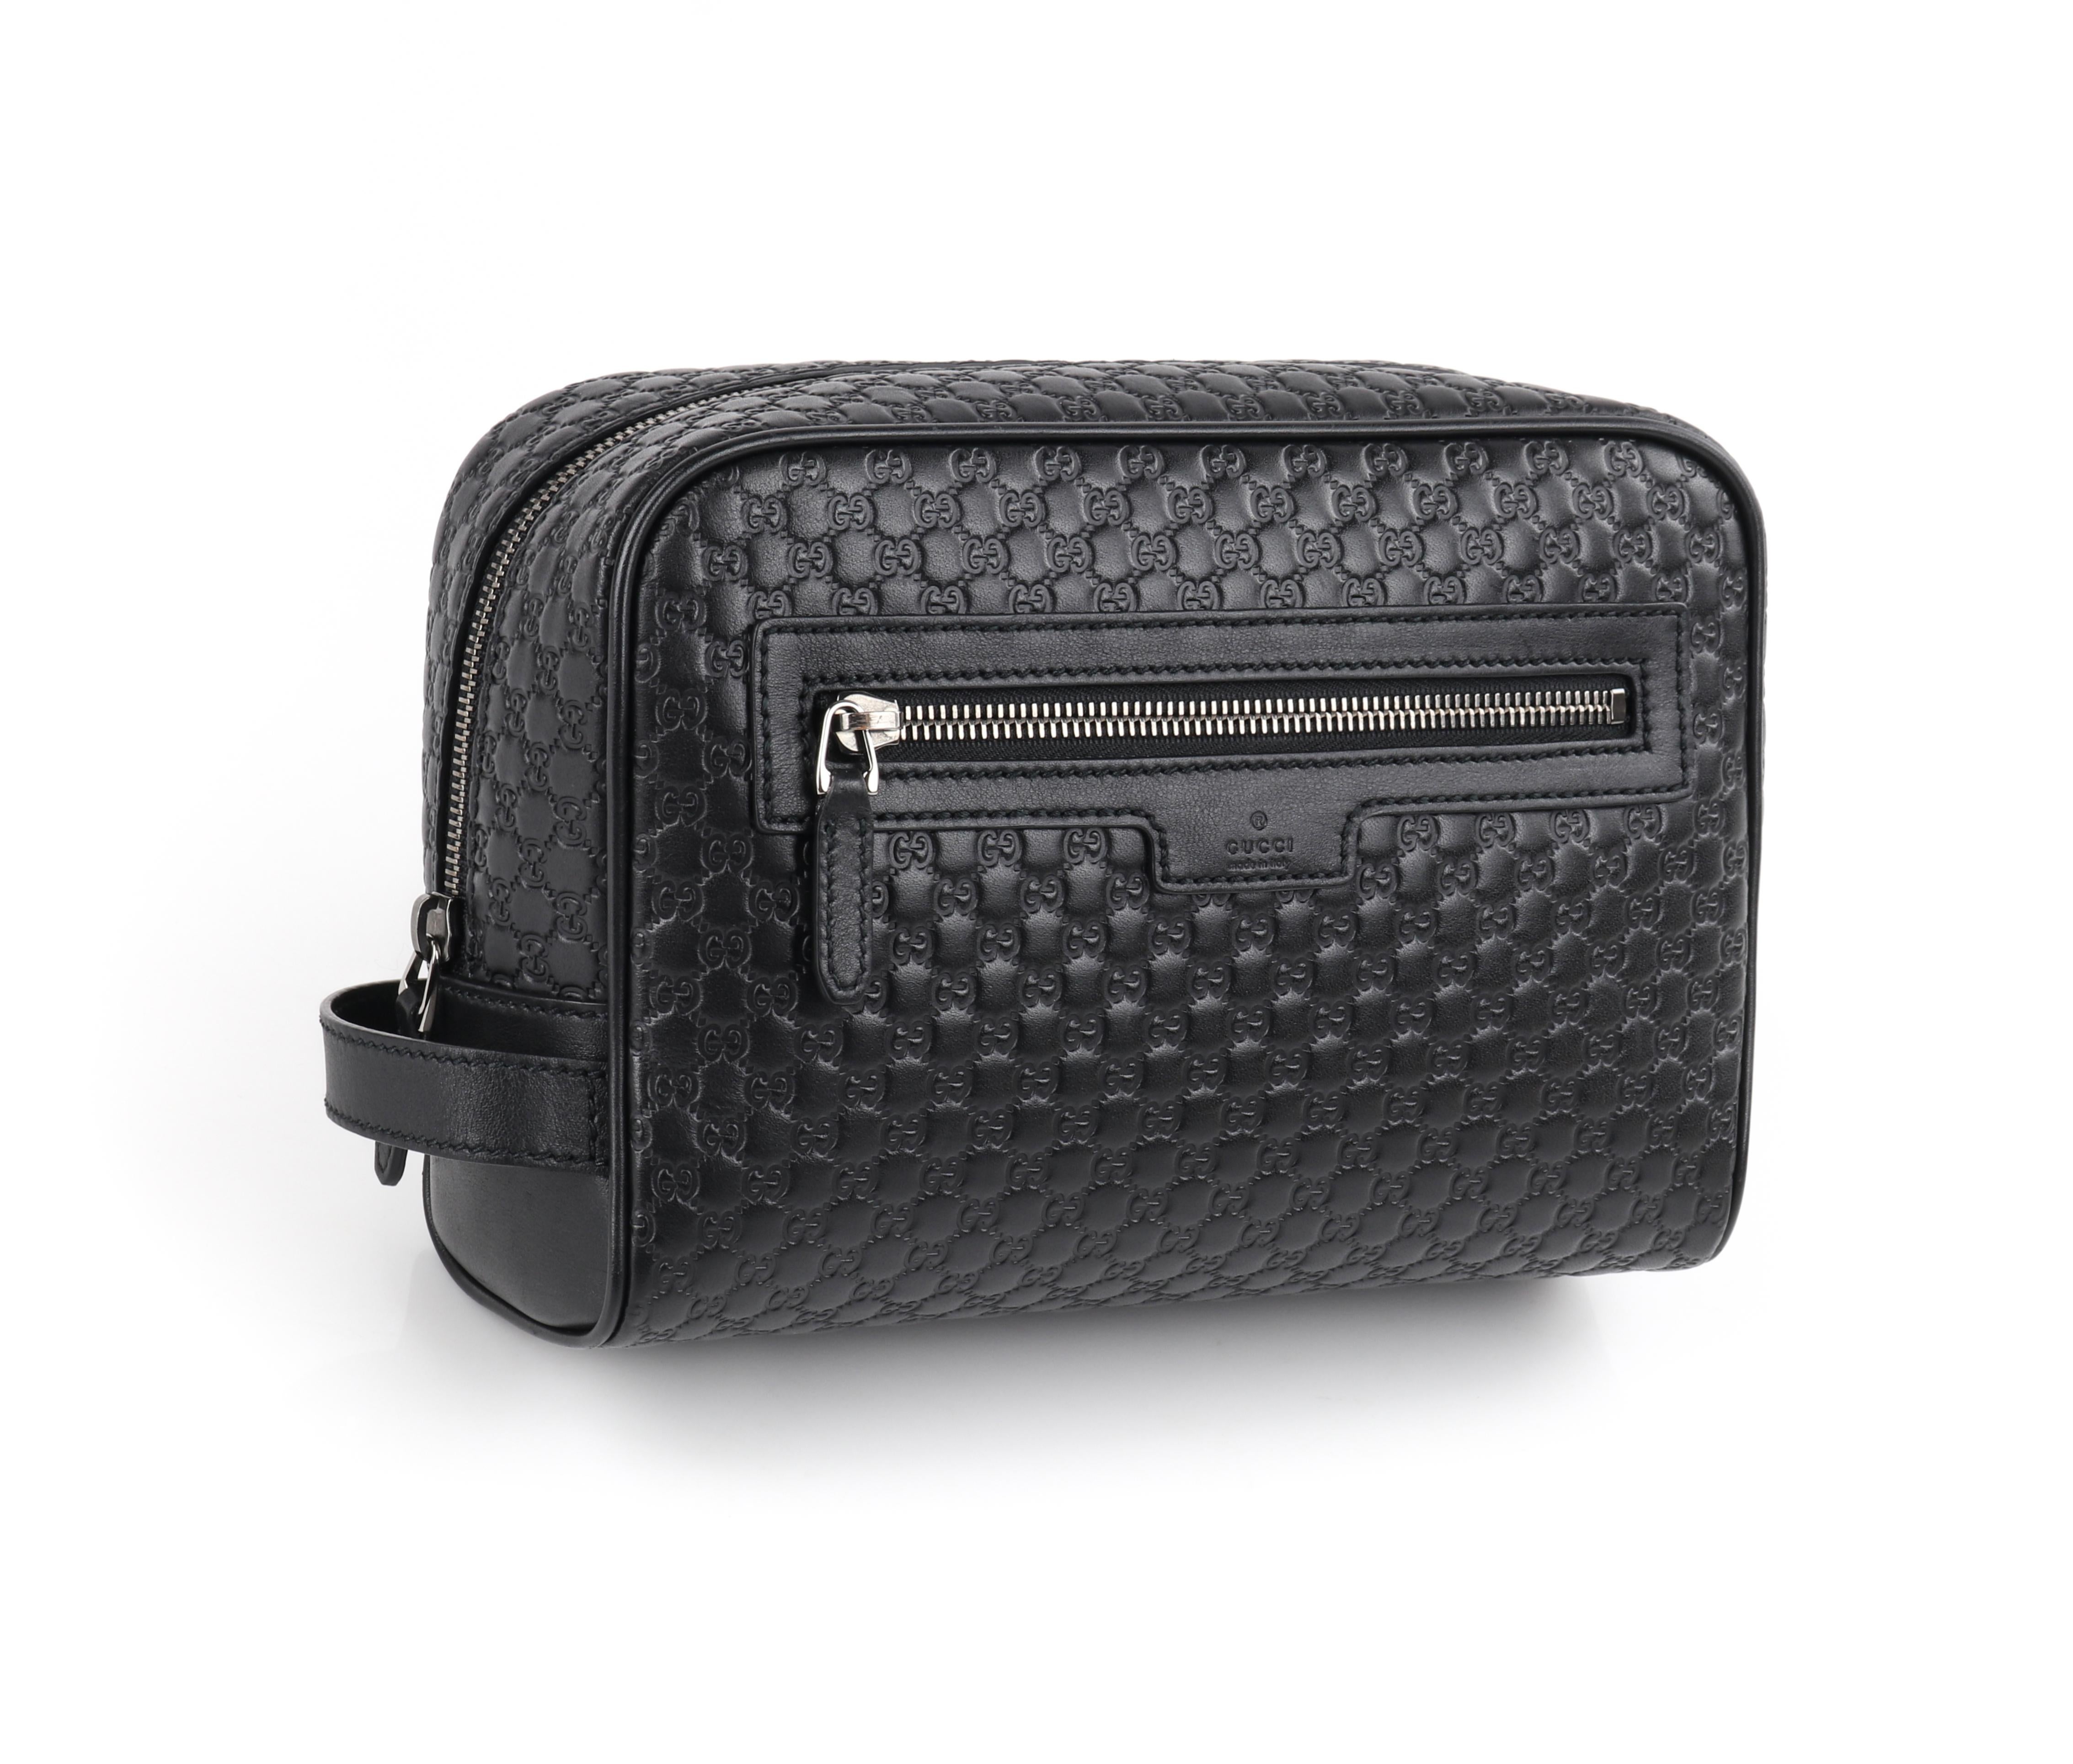 GUCCI “Microguccissima” Black Embossed Leather Zip Cosmetic Toiletry Travel Bag
 
Circa: 2018
Style: Cosmetic toiletry bag
Color(s): Black
Lined: Yes
Unmarked Fabric Content (feel of): Leather (shell); acetate cotton blend (lining); metal (hardware,